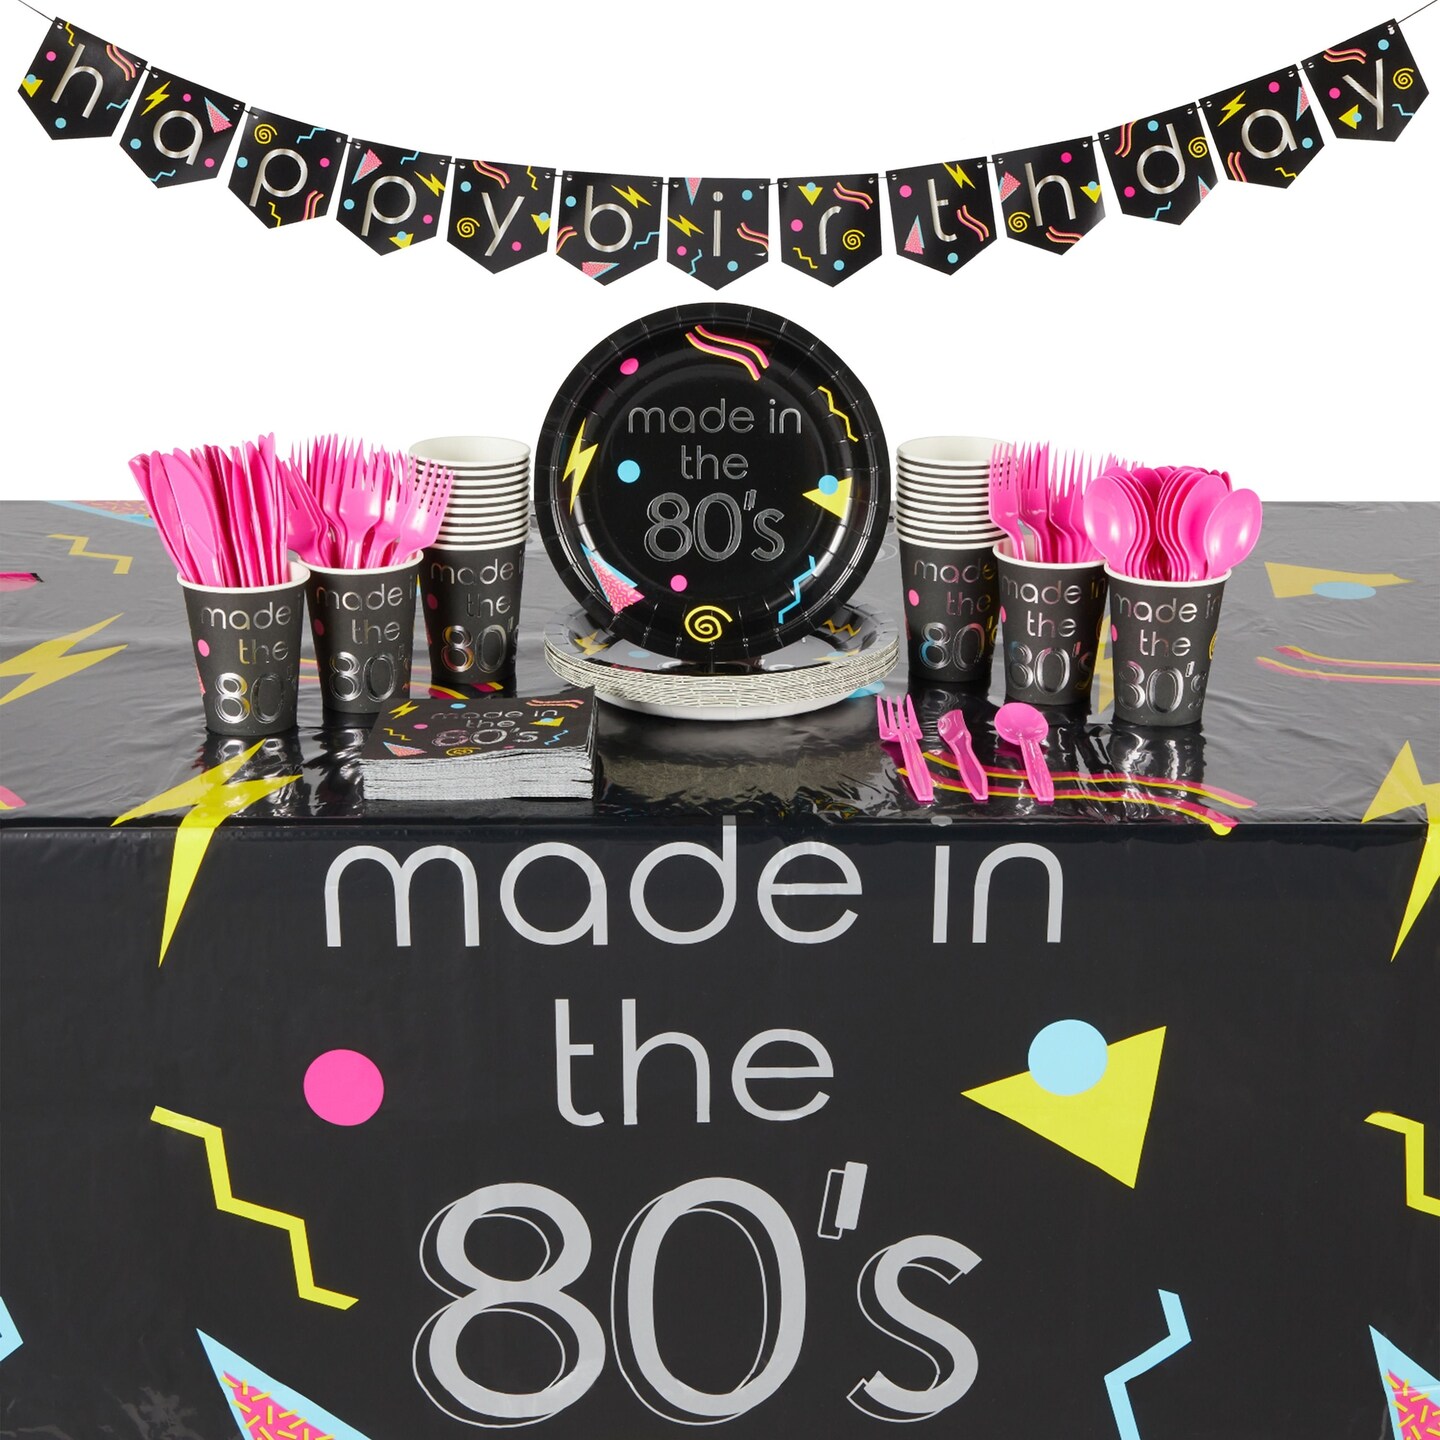 Serves 24 Guests 80s Birthday Party Decorations, Party Supplies Bundle Includes Plates, Napkins, Cups, Cutlery, Tablecloth, and Happy Birthday Banner, Disposable Dinnerware Set (146 Pieces)